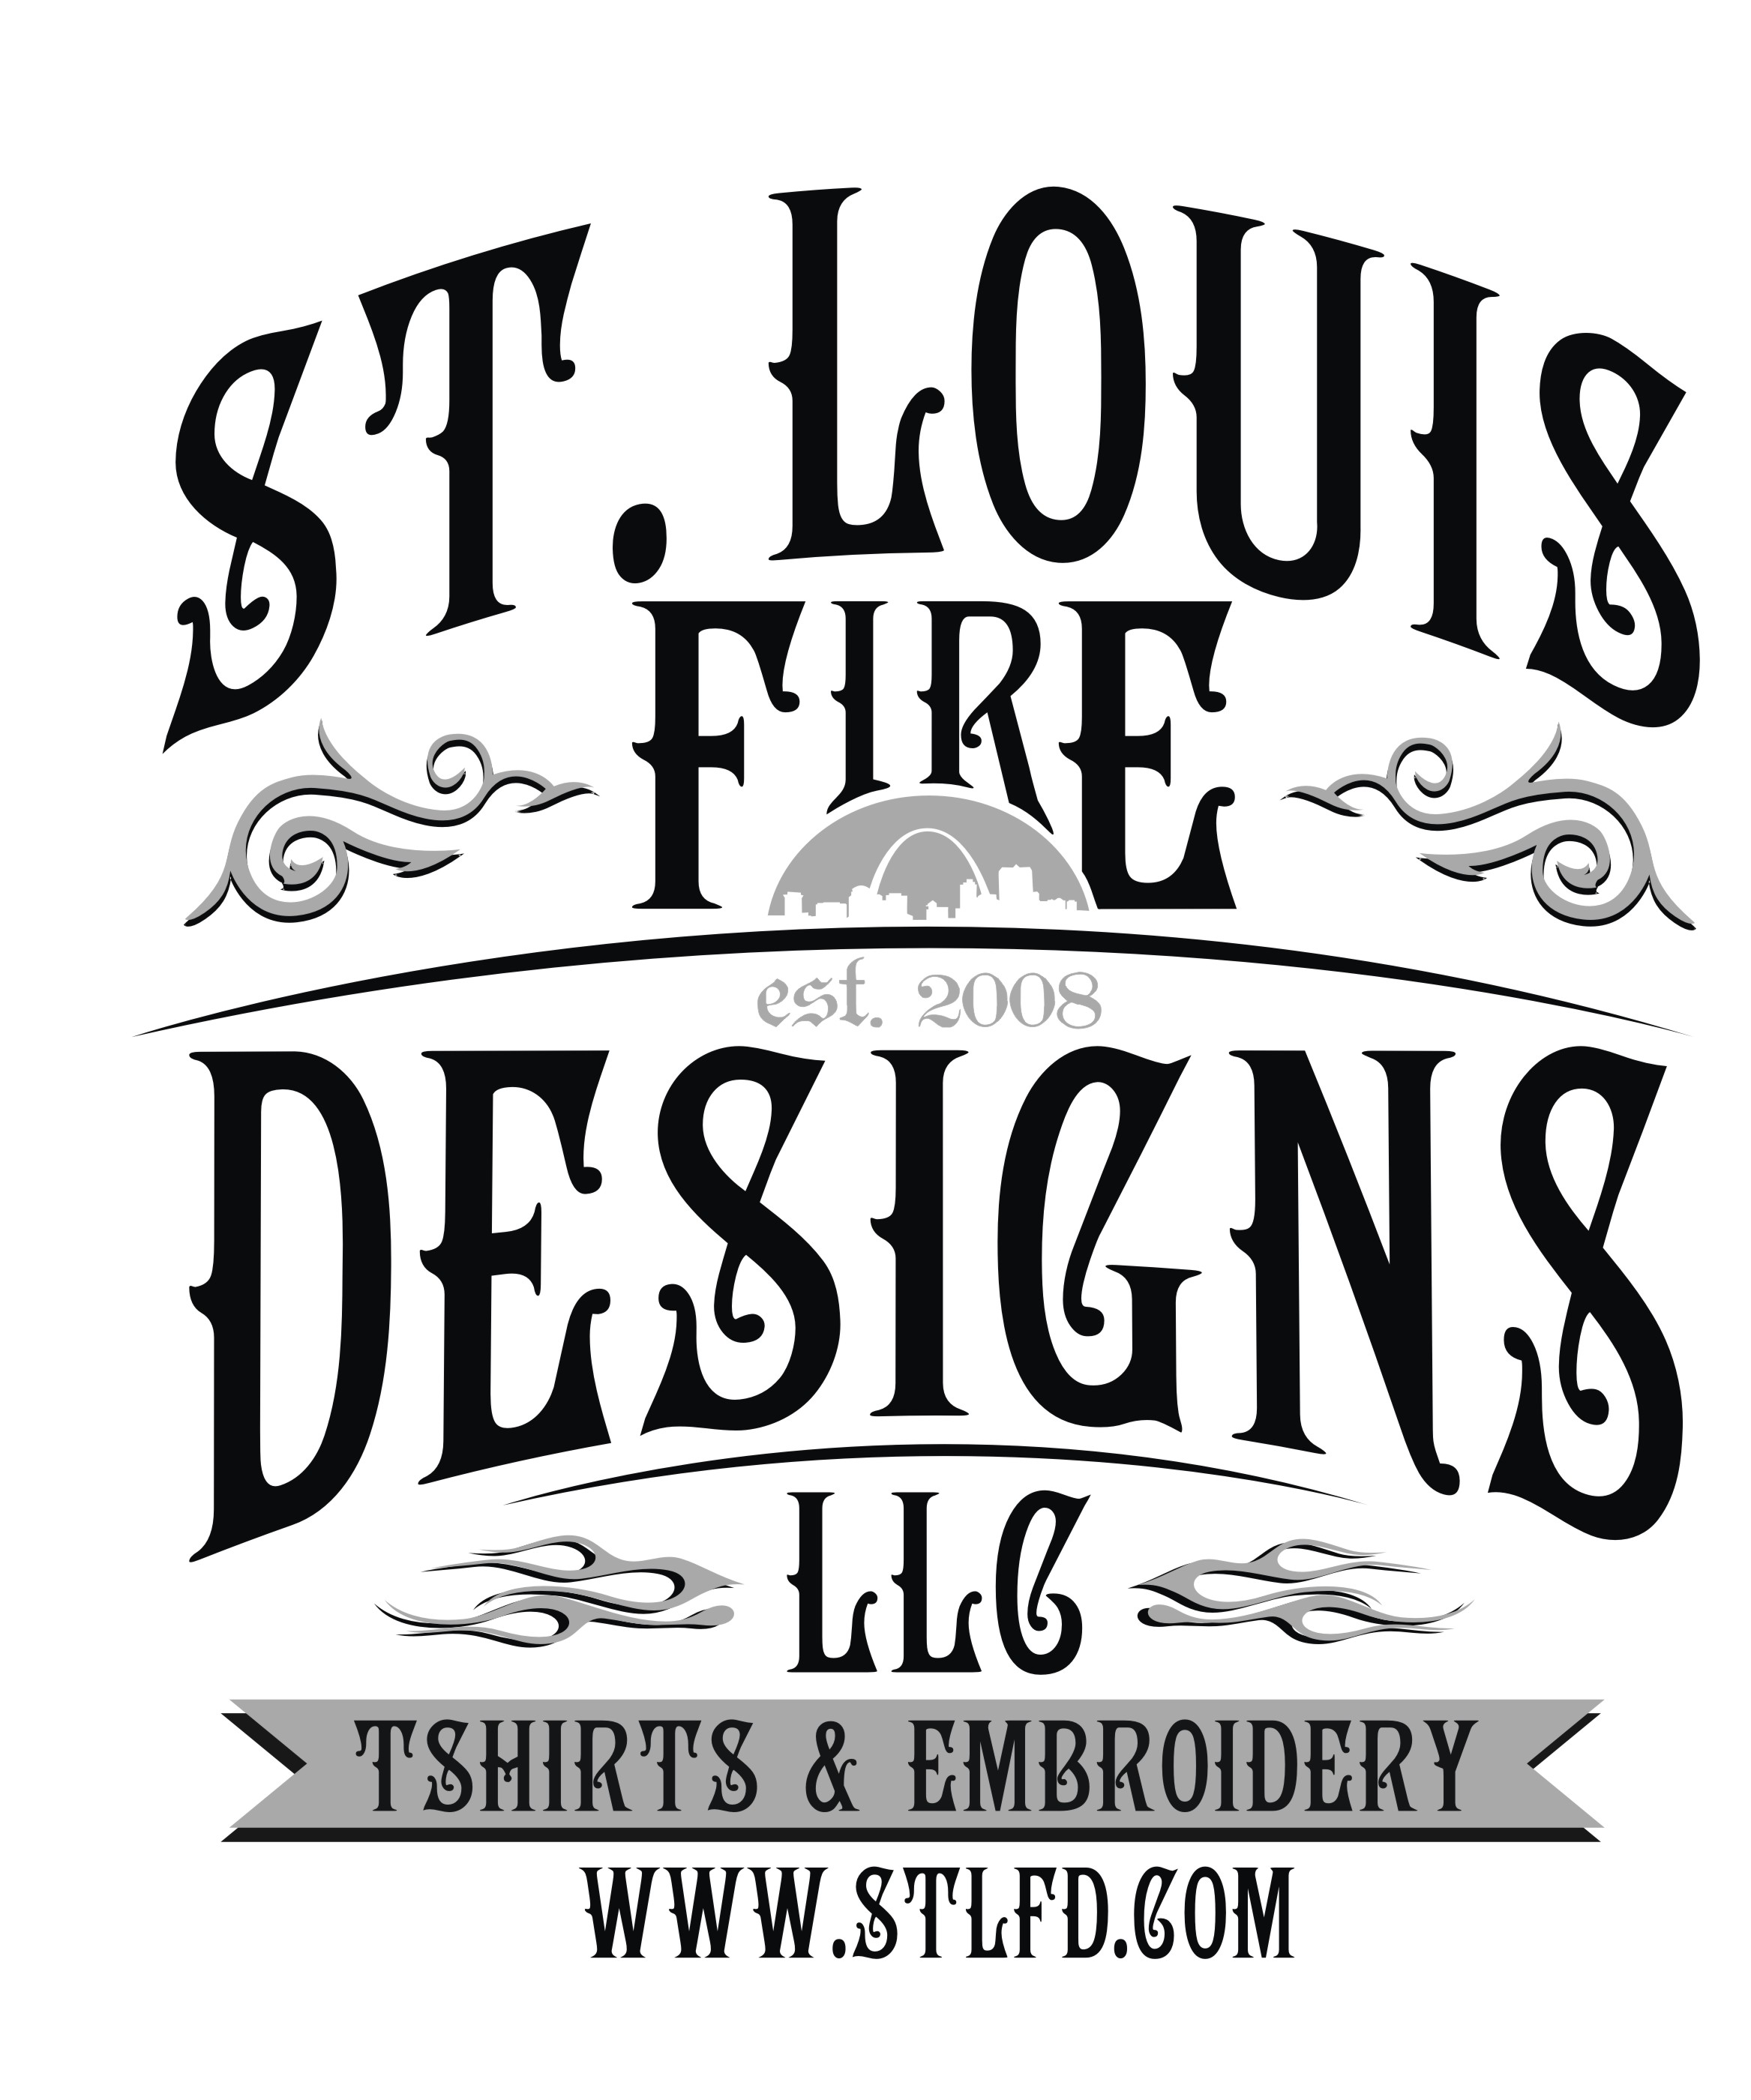 ST LOUIS FIRE DEPT Home Decor Metal Sign Police Gift 106180013051 